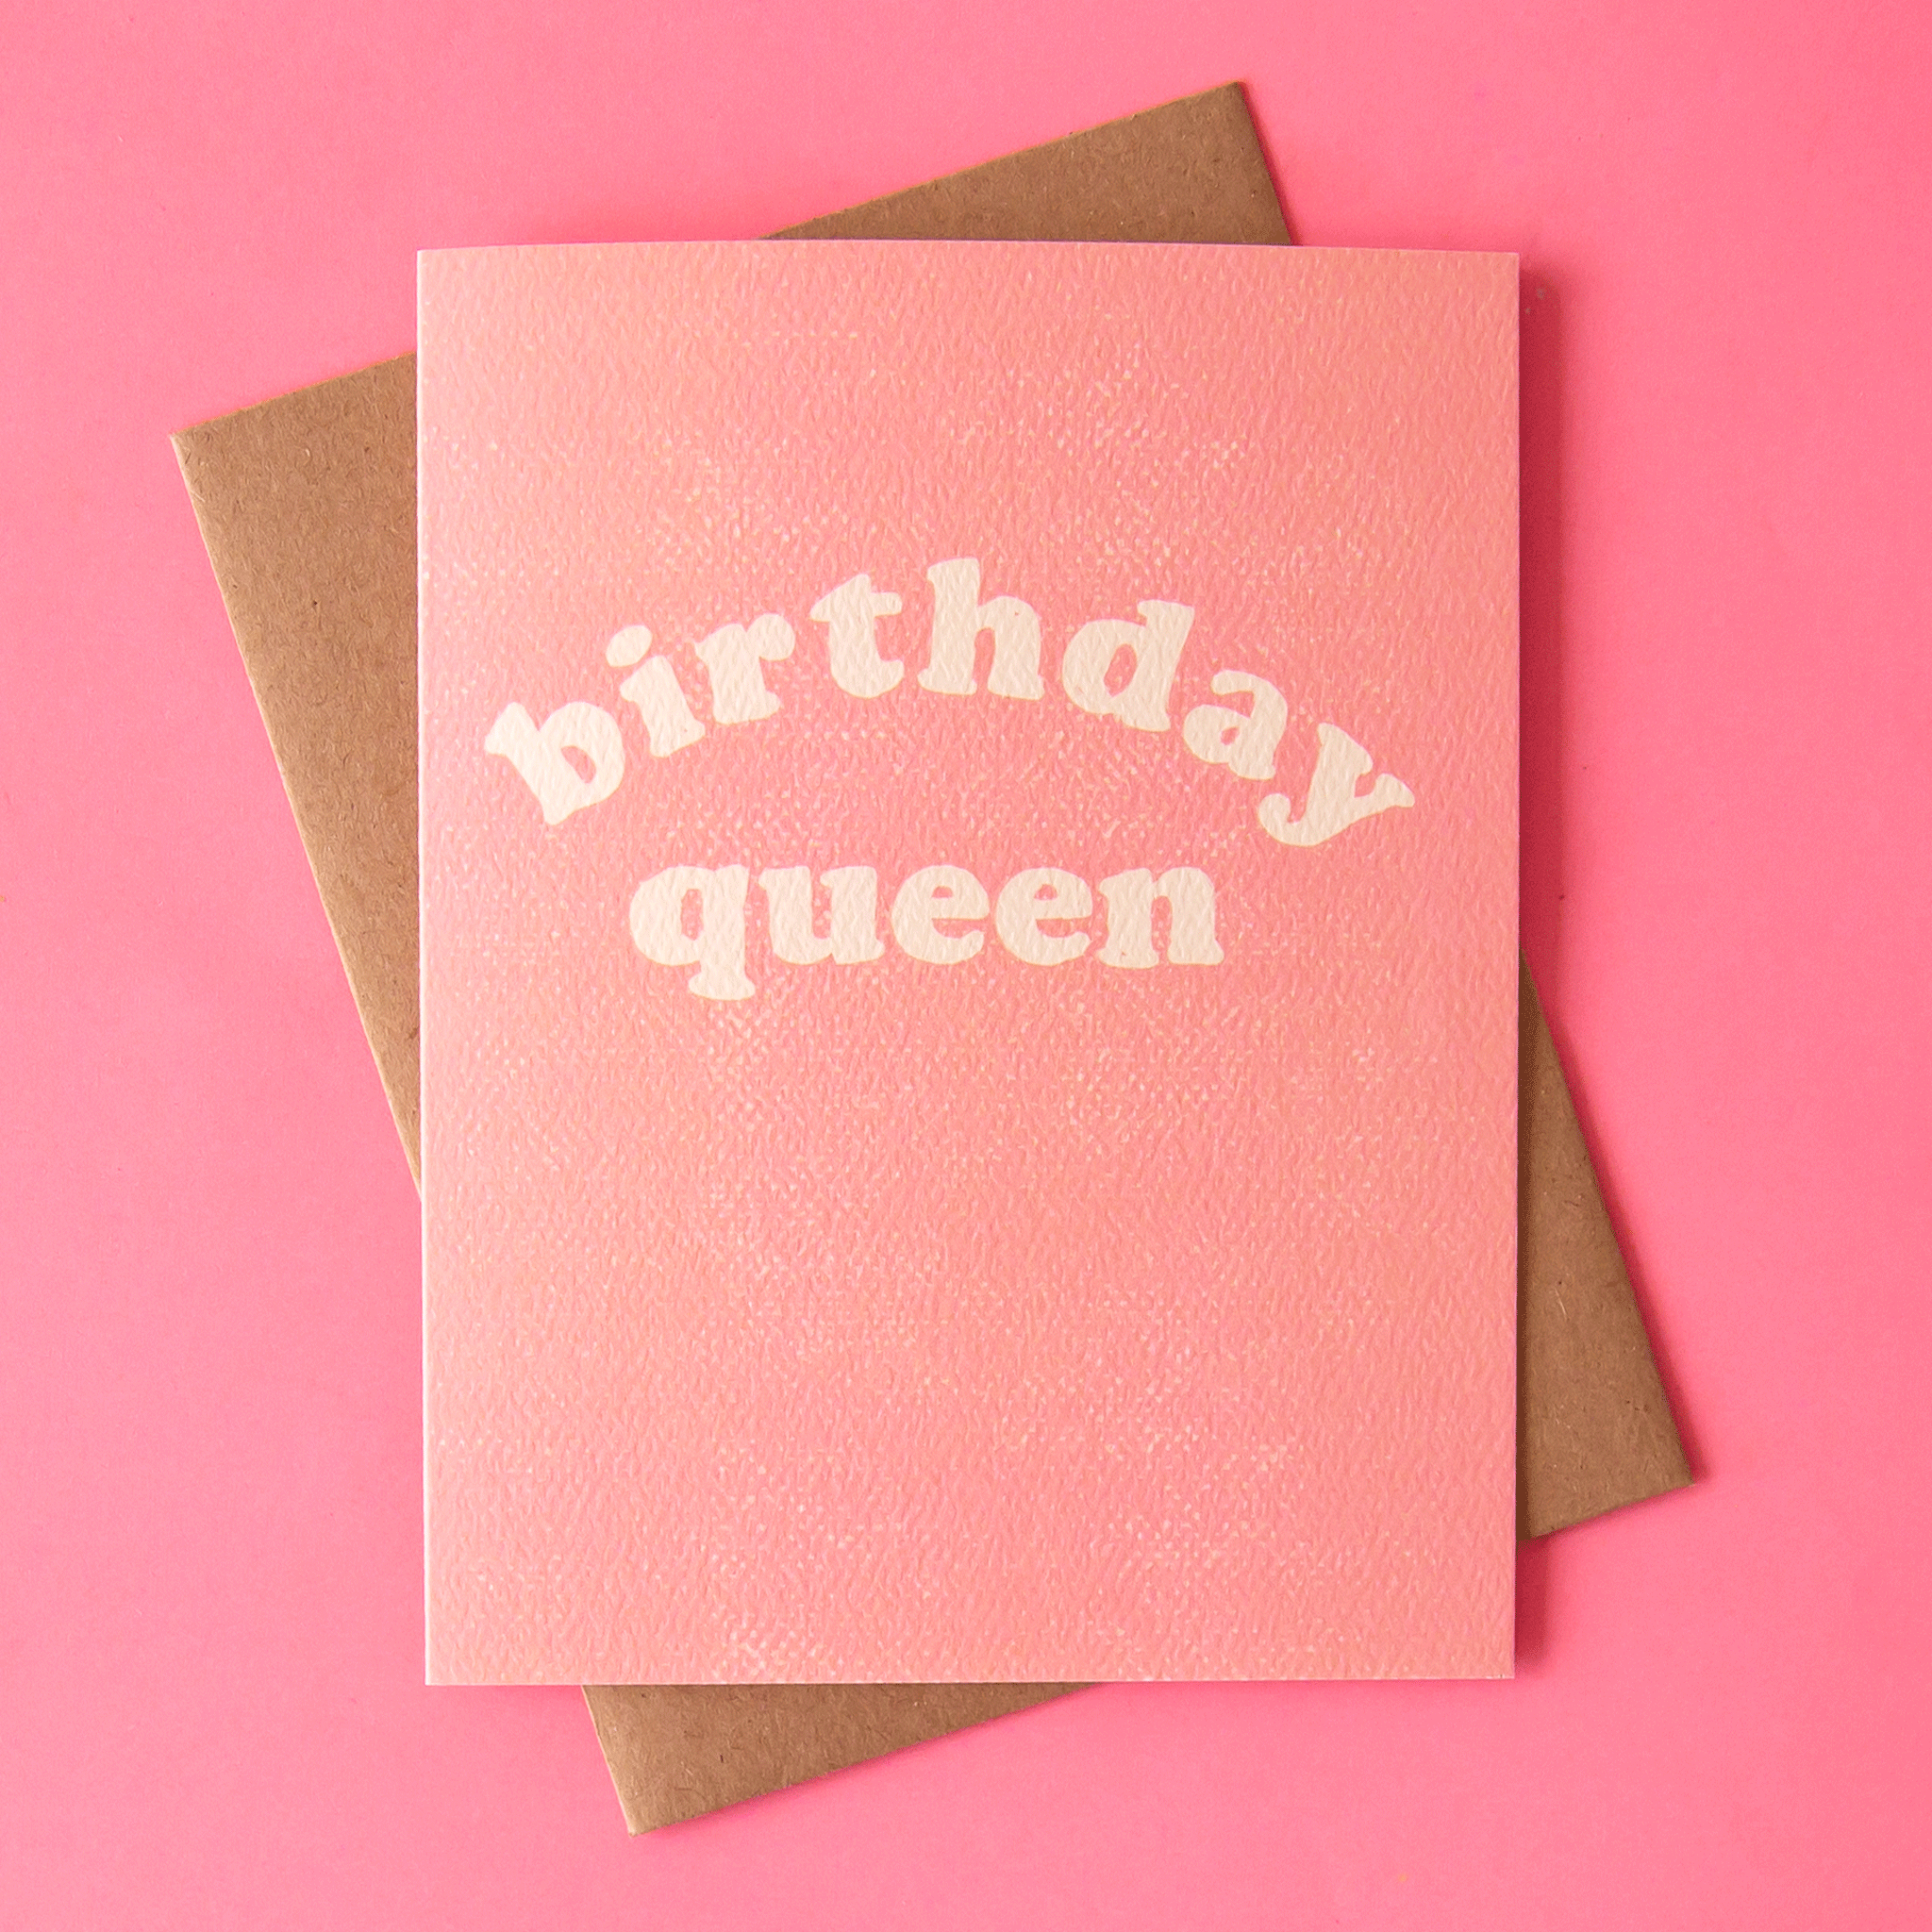 On a pink background is a pink birthday card with a Kraft brown envelope that says, &quot;birthday queen&quot; in white text.